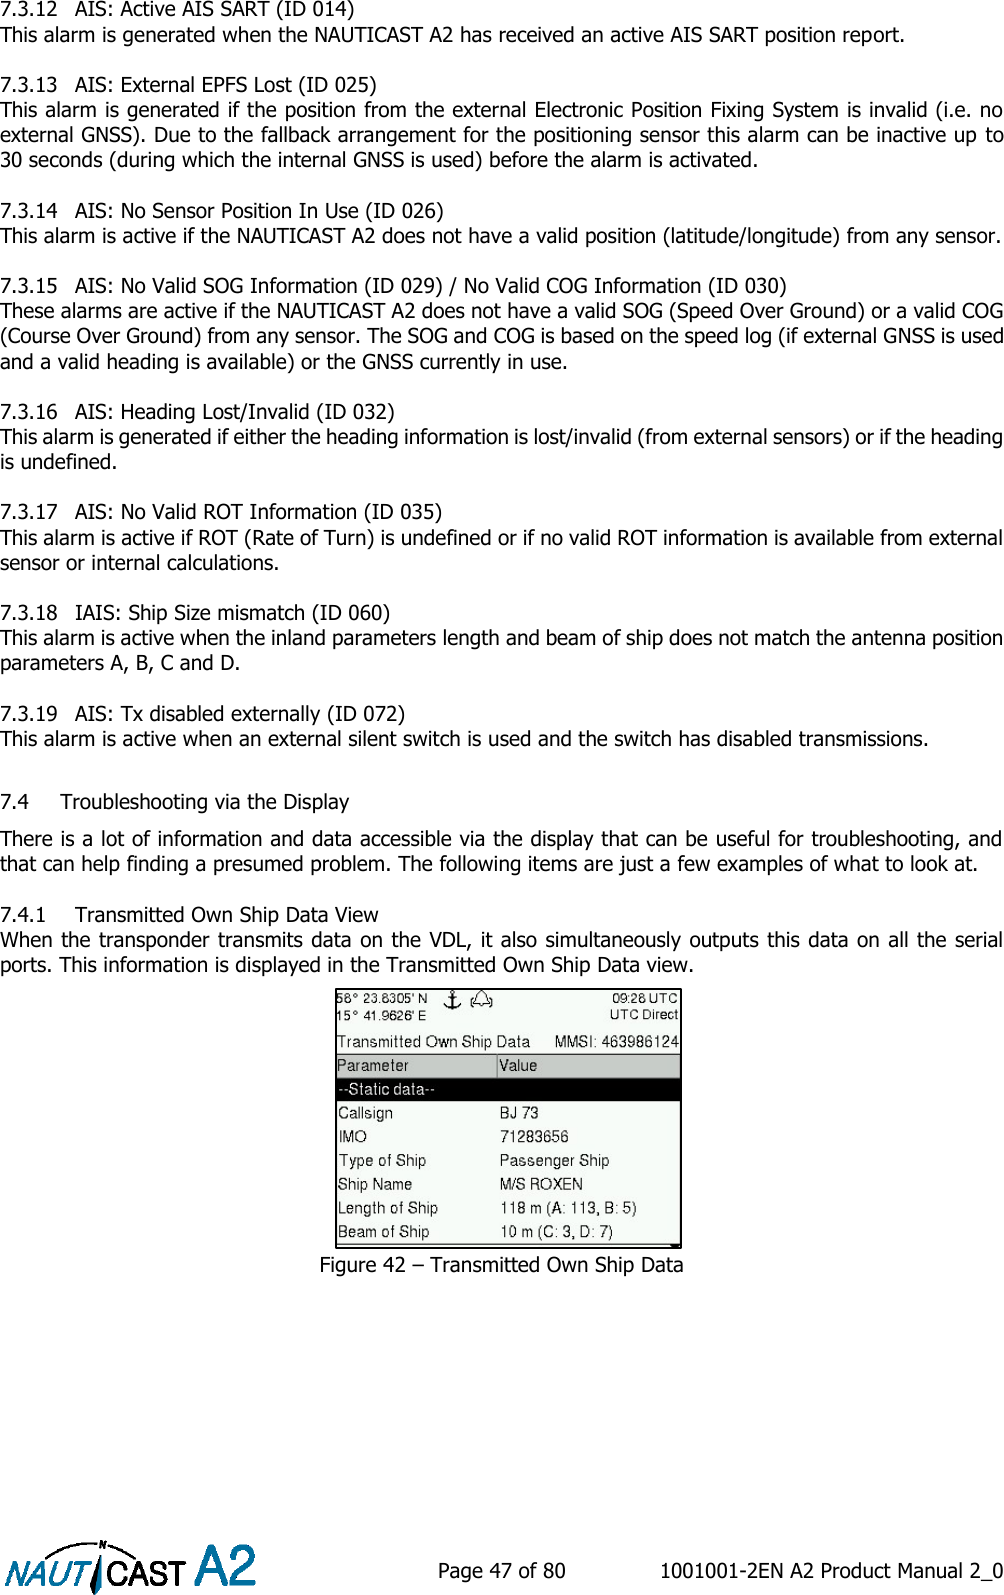    Page 47 of 80  1001001-2EN A2 Product Manual 2_0   7.3.12 AIS: Active AIS SART (ID 014) This alarm is generated when the NAUTICAST A2 has received an active AIS SART position report.  7.3.13 AIS: External EPFS Lost (ID 025) This alarm is generated if the position from the external Electronic Position Fixing System is invalid (i.e. no external GNSS). Due to the fallback arrangement for the positioning sensor this alarm can be inactive up to 30 seconds (during which the internal GNSS is used) before the alarm is activated.  7.3.14 AIS: No Sensor Position In Use (ID 026) This alarm is active if the NAUTICAST A2 does not have a valid position (latitude/longitude) from any sensor.  7.3.15 AIS: No Valid SOG Information (ID 029) / No Valid COG Information (ID 030) These alarms are active if the NAUTICAST A2 does not have a valid SOG (Speed Over Ground) or a valid COG (Course Over Ground) from any sensor. The SOG and COG is based on the speed log (if external GNSS is used and a valid heading is available) or the GNSS currently in use.  7.3.16 AIS: Heading Lost/Invalid (ID 032) This alarm is generated if either the heading information is lost/invalid (from external sensors) or if the heading is undefined.  7.3.17 AIS: No Valid ROT Information (ID 035) This alarm is active if ROT (Rate of Turn) is undefined or if no valid ROT information is available from external sensor or internal calculations.  7.3.18 IAIS: Ship Size mismatch (ID 060) This alarm is active when the inland parameters length and beam of ship does not match the antenna position parameters A, B, C and D.  7.3.19 AIS: Tx disabled externally (ID 072) This alarm is active when an external silent switch is used and the switch has disabled transmissions.   7.4 Troubleshooting via the Display There is a lot of information and data accessible via the display that can be useful for troubleshooting, and that can help finding a presumed problem. The following items are just a few examples of what to look at.  7.4.1 Transmitted Own Ship Data View When the transponder transmits data on the VDL, it also simultaneously outputs this data on all the serial ports. This information is displayed in the Transmitted Own Ship Data view. Figure 42 – Transmitted Own Ship Data 